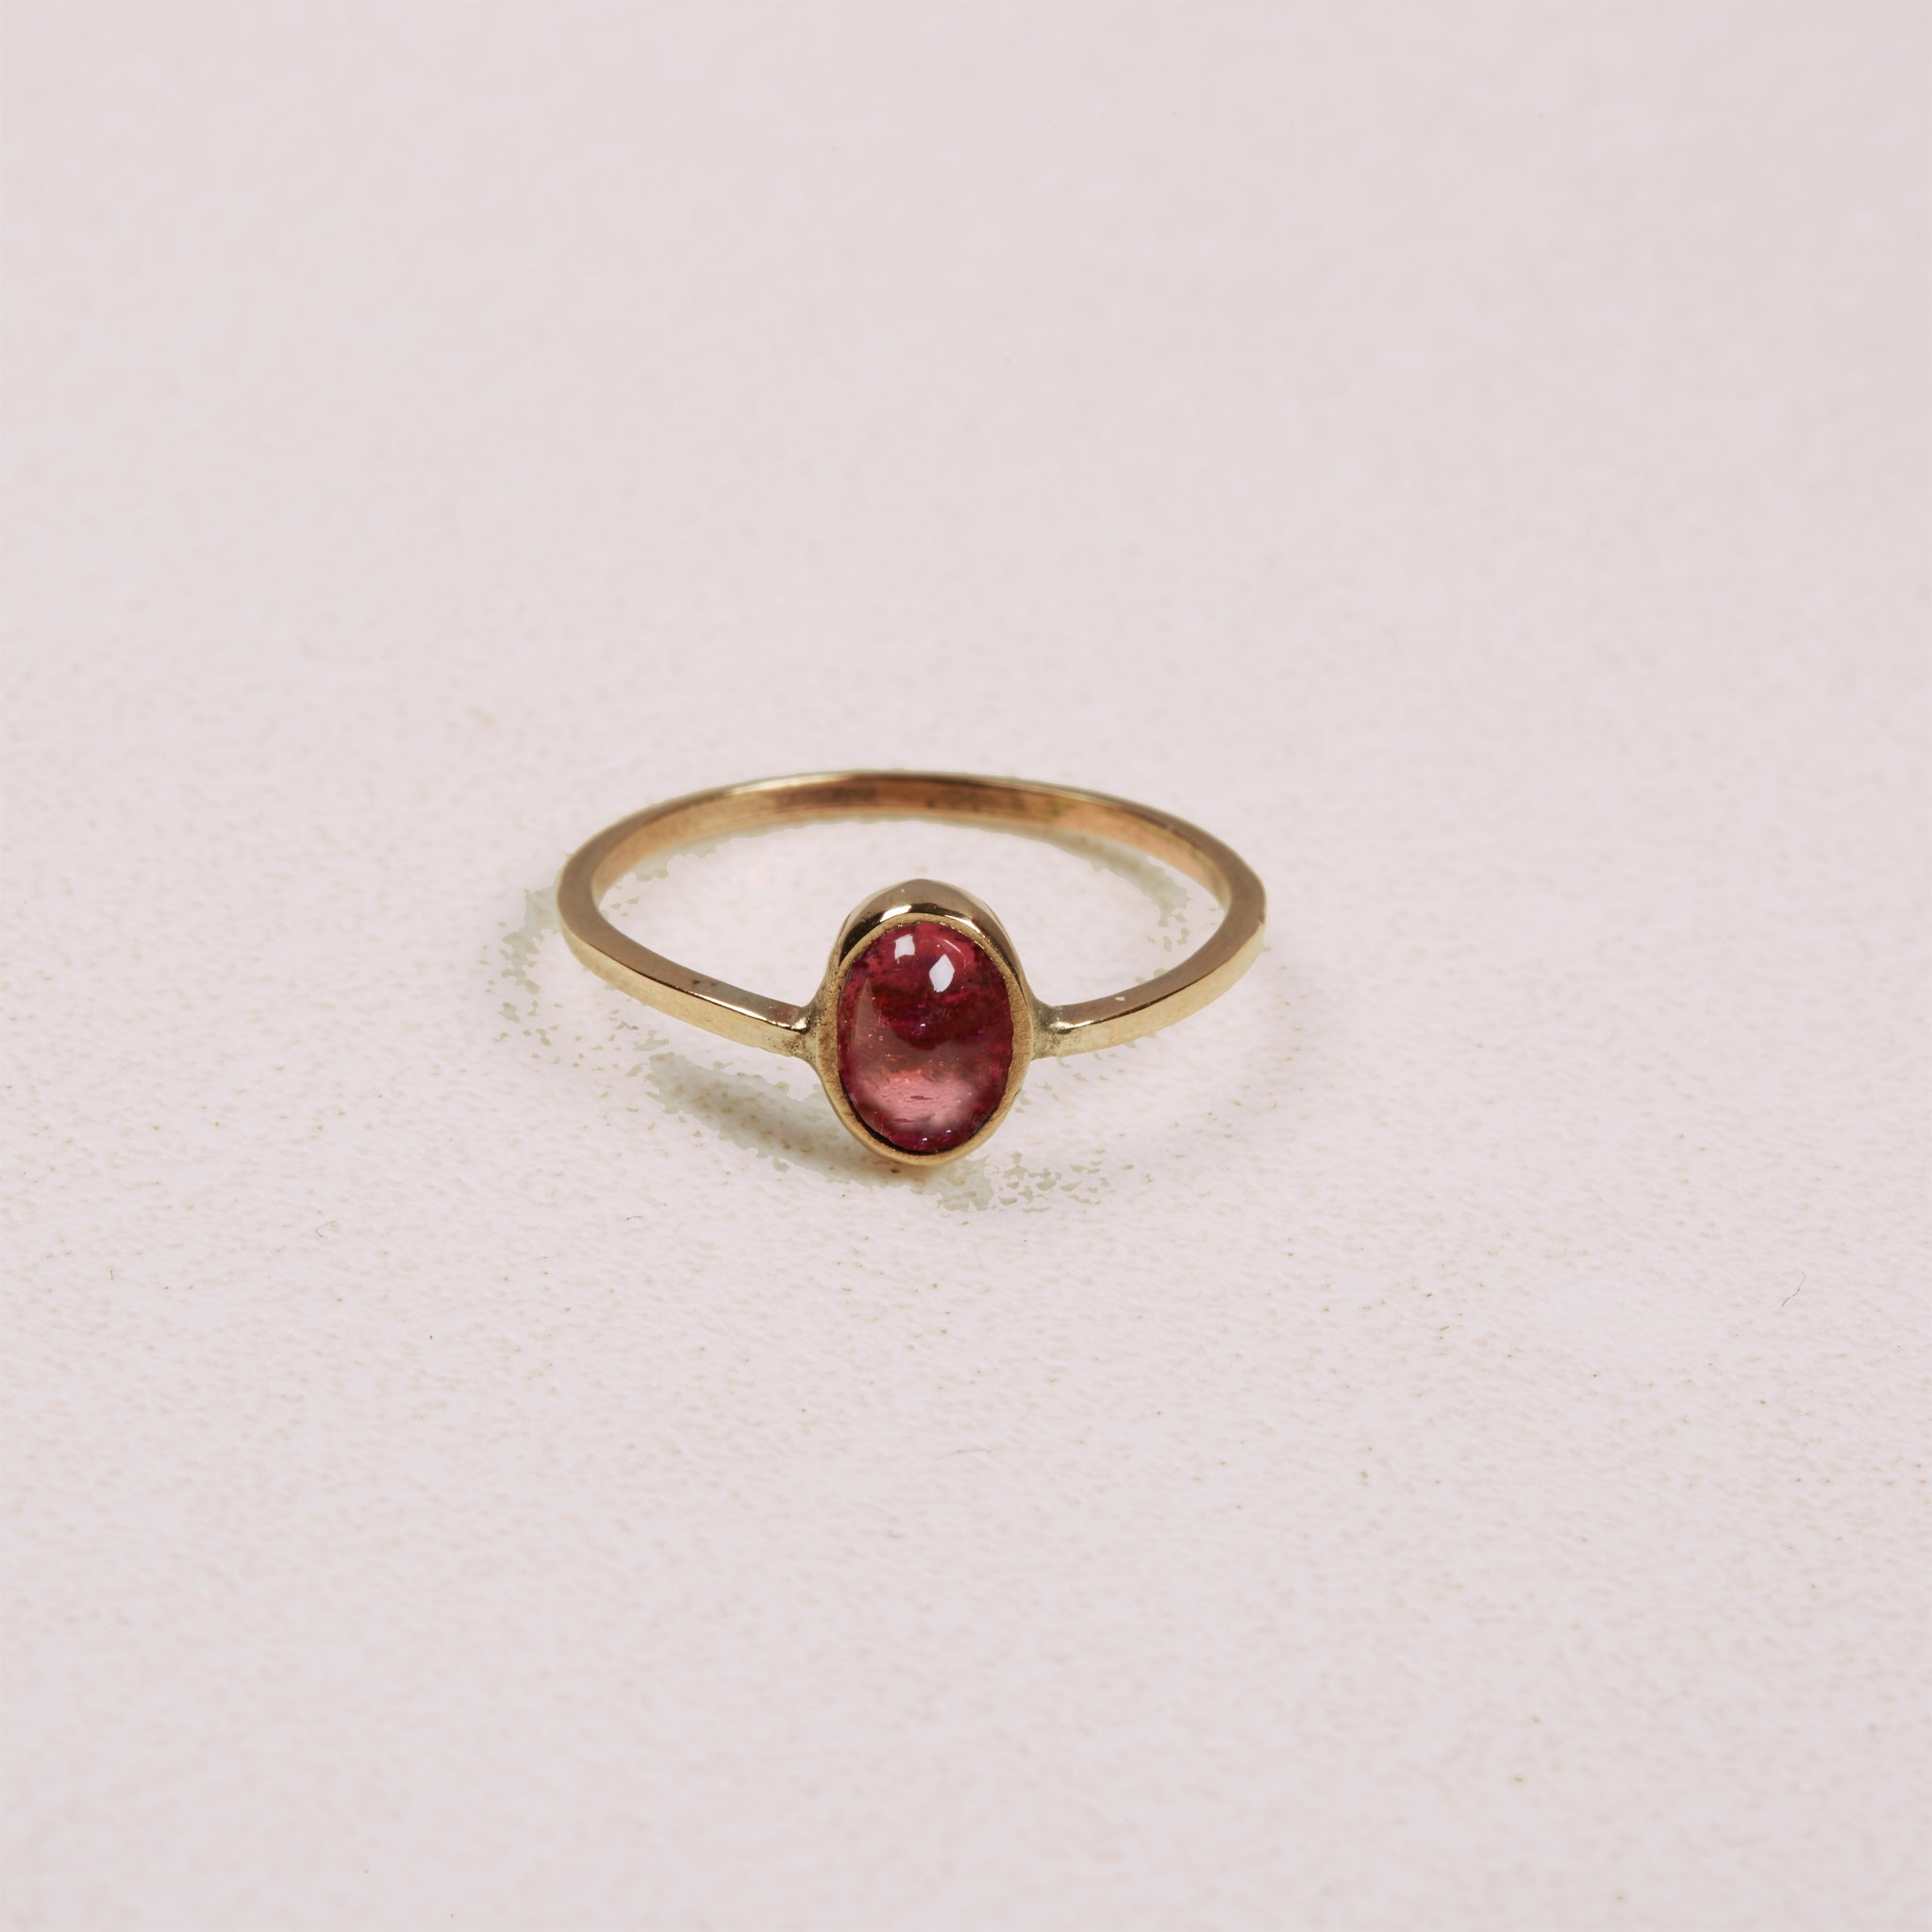 Solid gold simple and minimal pink tourmaline ring